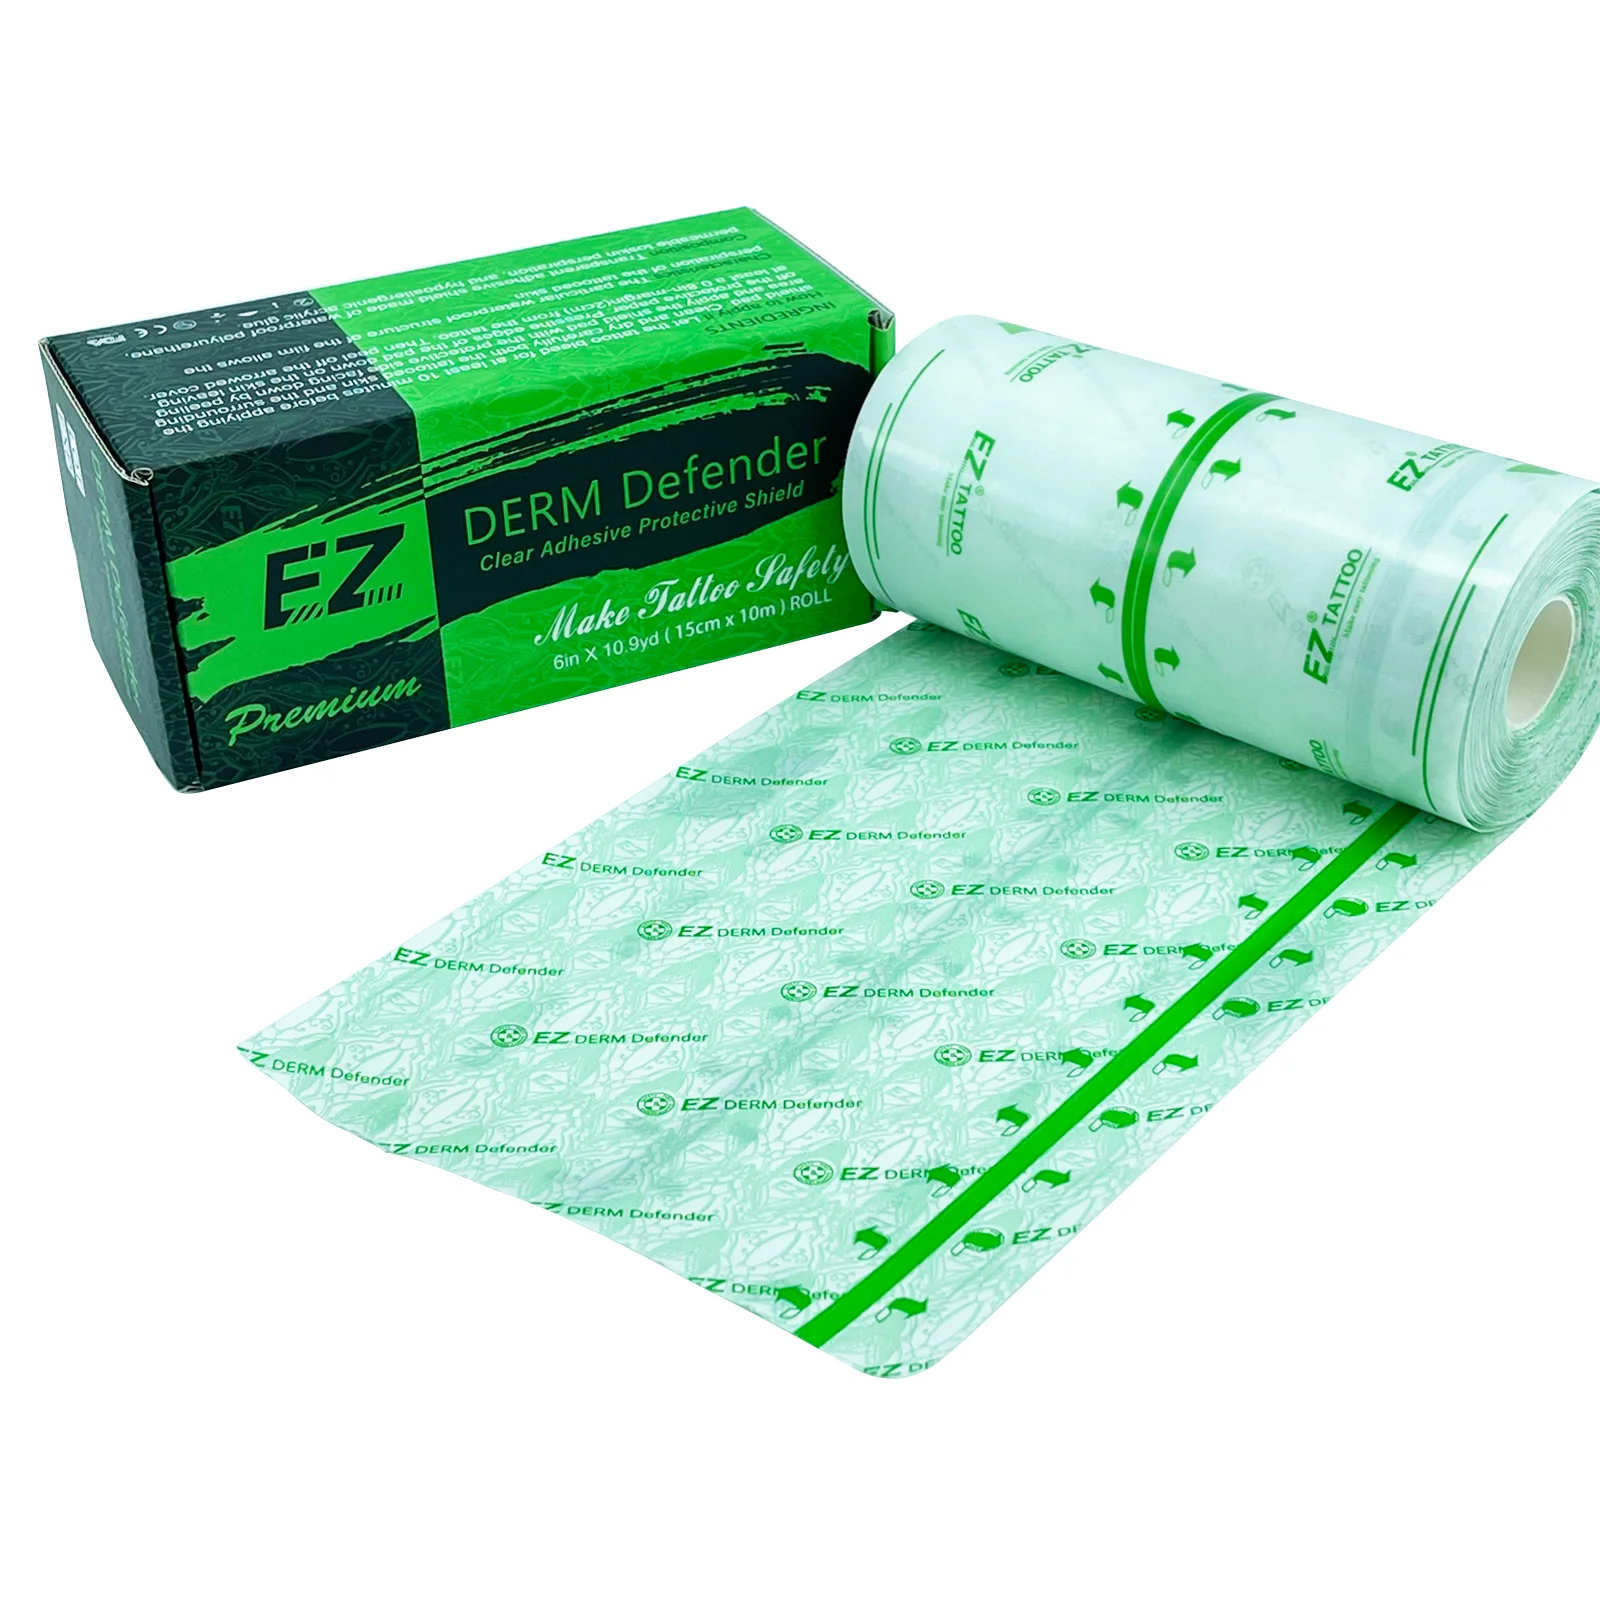 EZ Premium Derm Defender Tattoo Adhesive Protective Shield Waterproof Tattoo Film Aftercare Skin Healing Supply 10/15 CM*10 M 1200pcs disposable tattoo barrier film waterproof adhesive bandage protective barrier film roll for tattoo dental device